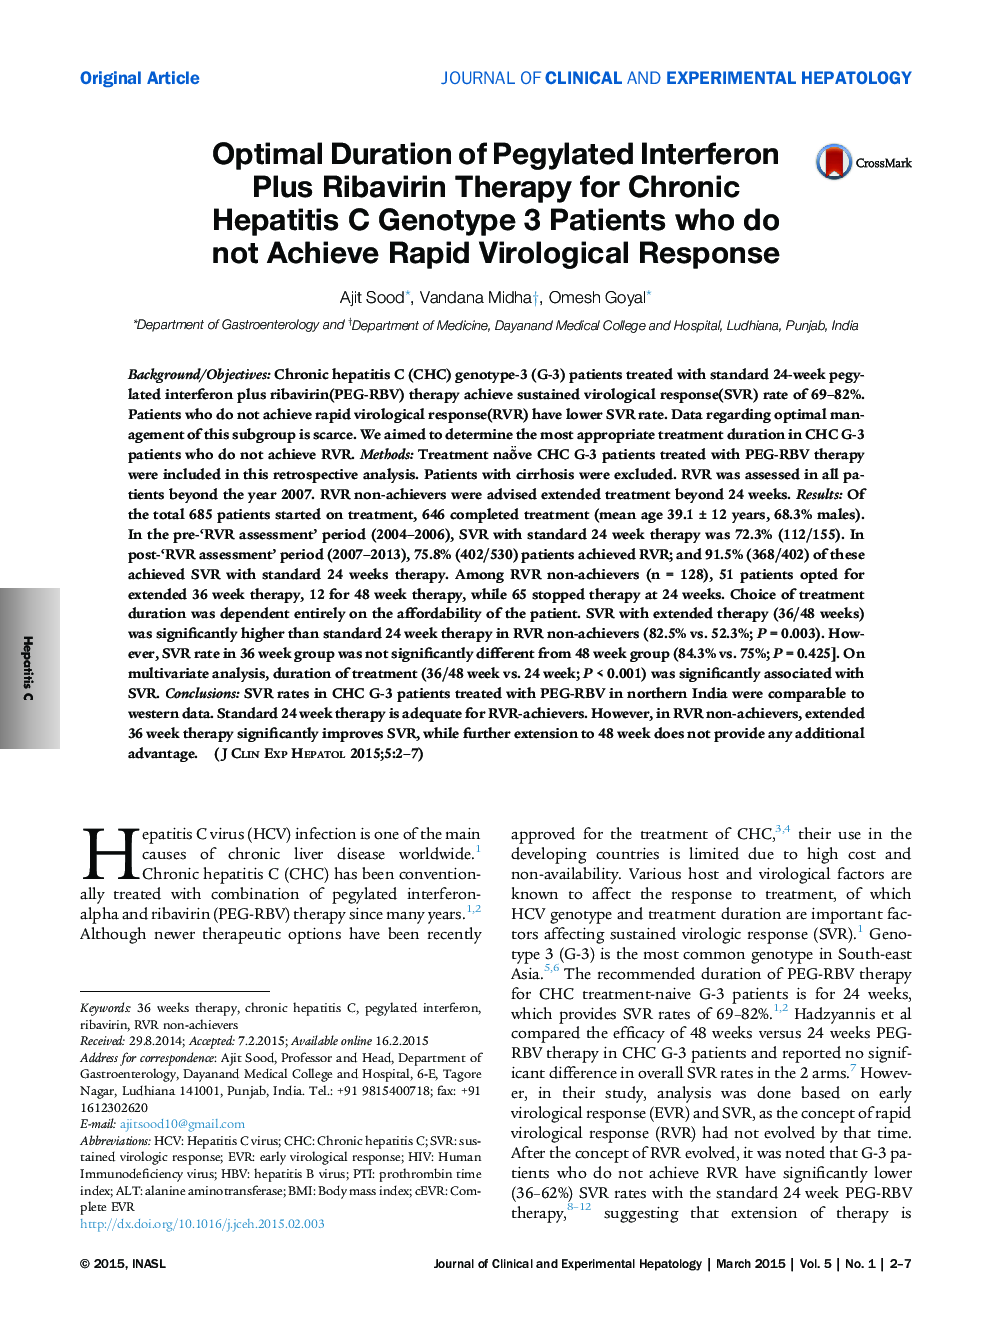 Optimal Duration of Pegylated Interferon Plus Ribavirin Therapy for Chronic Hepatitis C Genotype 3 Patients who do not Achieve Rapid Virological Response